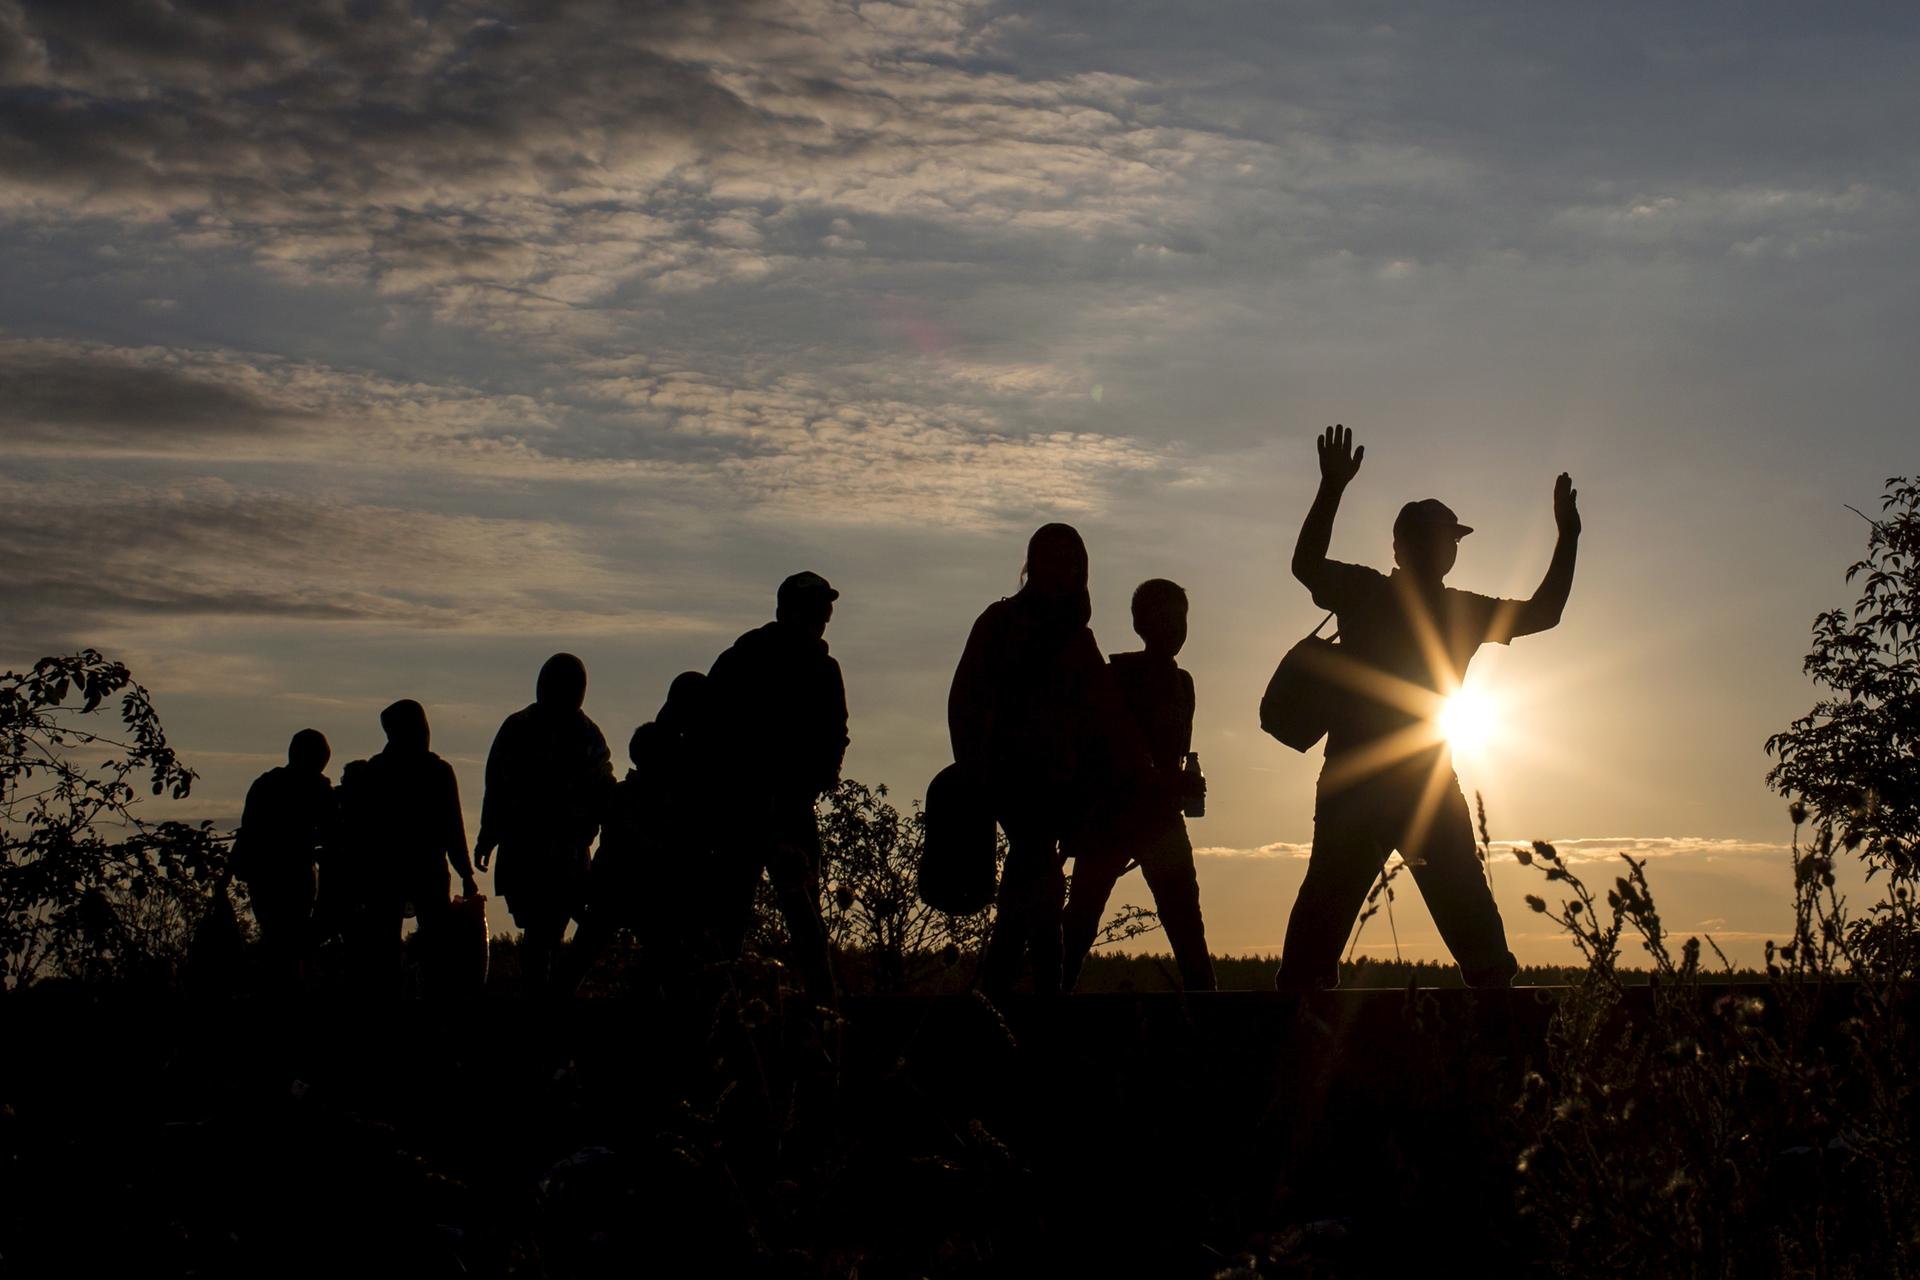 Migrants walk along rail tracks as they arrive at a collection point in the village of Roszke, Hungary, September 8, 2015, after crossing the border from Serbia.